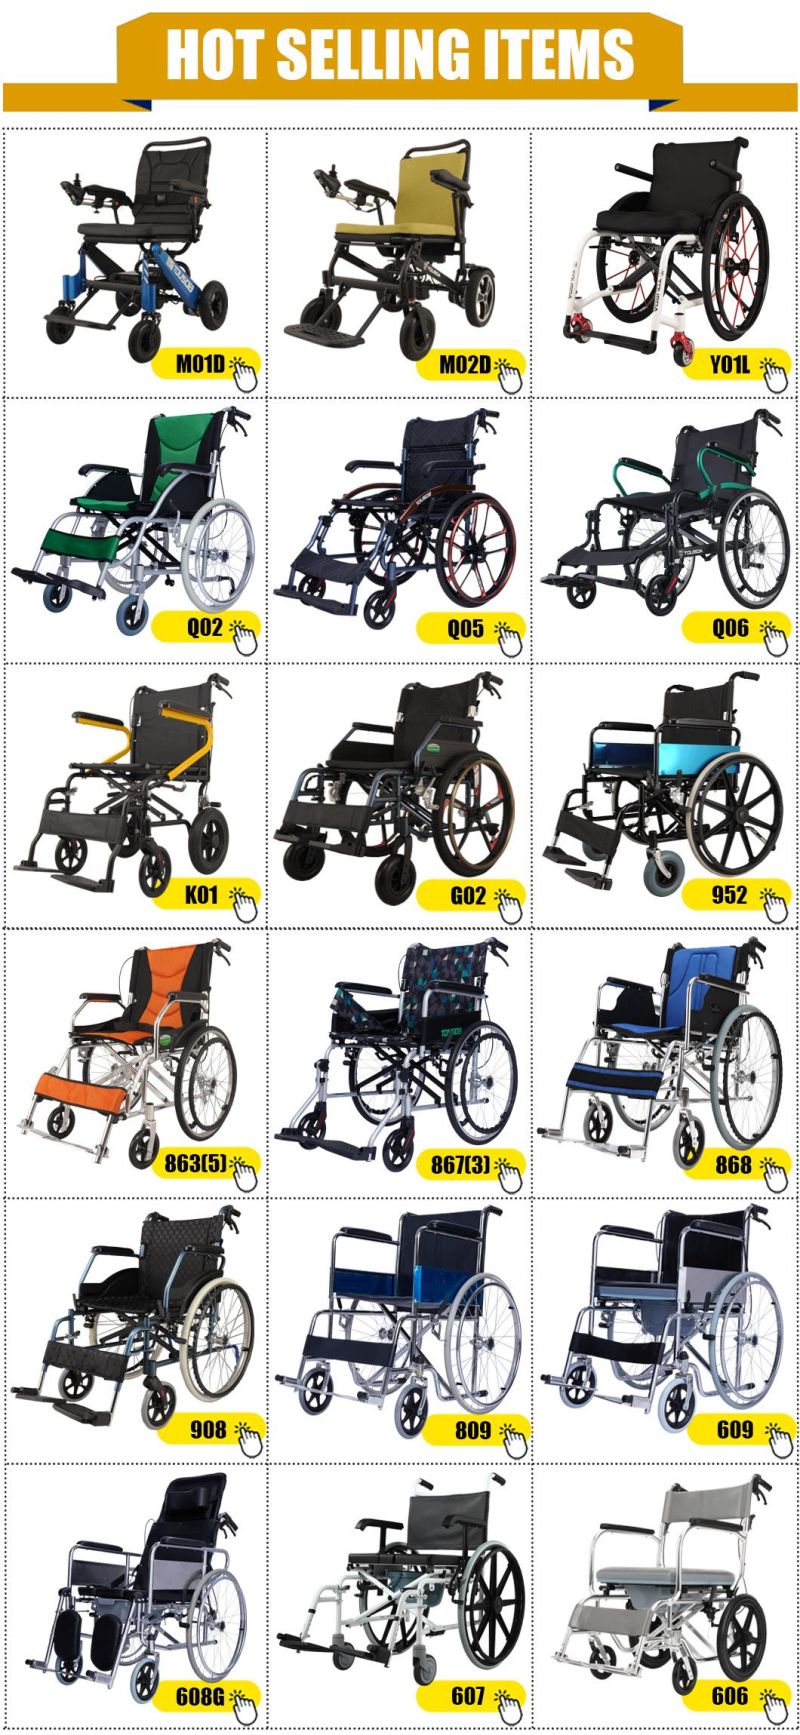 Most Popular Air Plane Travelling Aluminum Wheelchair Easy Folding and Easy Transport Wheel Chairs